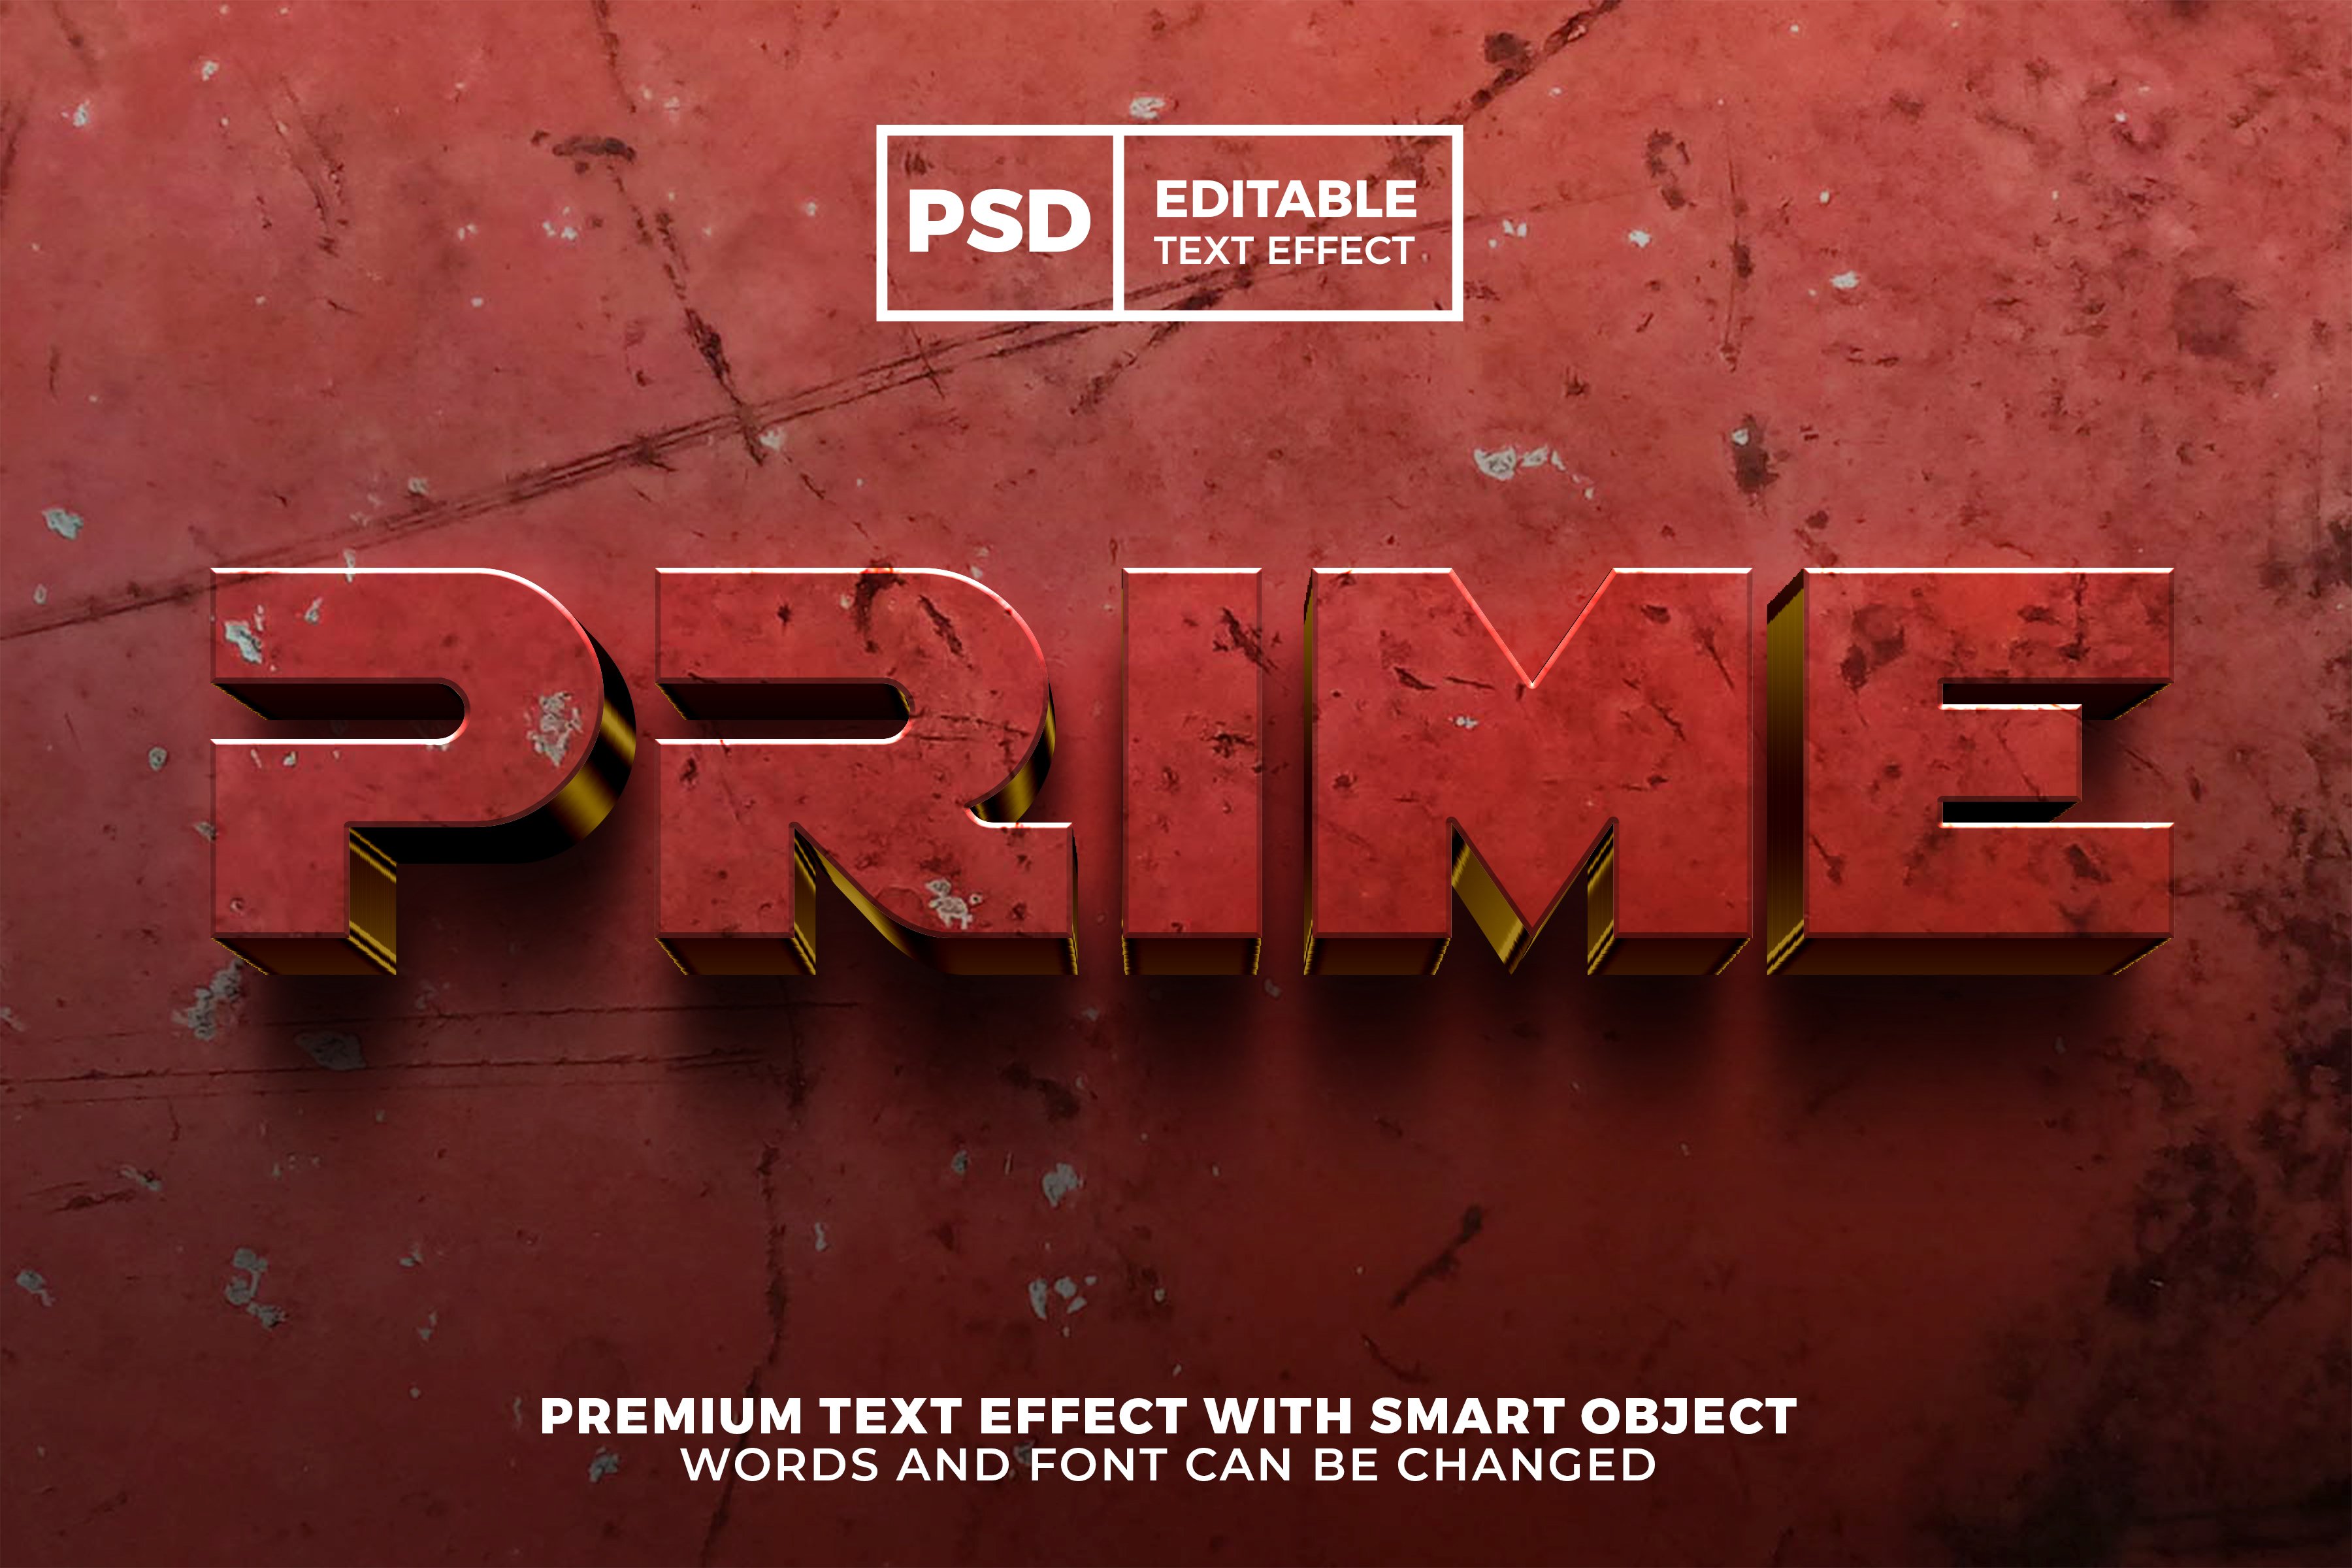 prime rusty metal 3d text effectcover image.